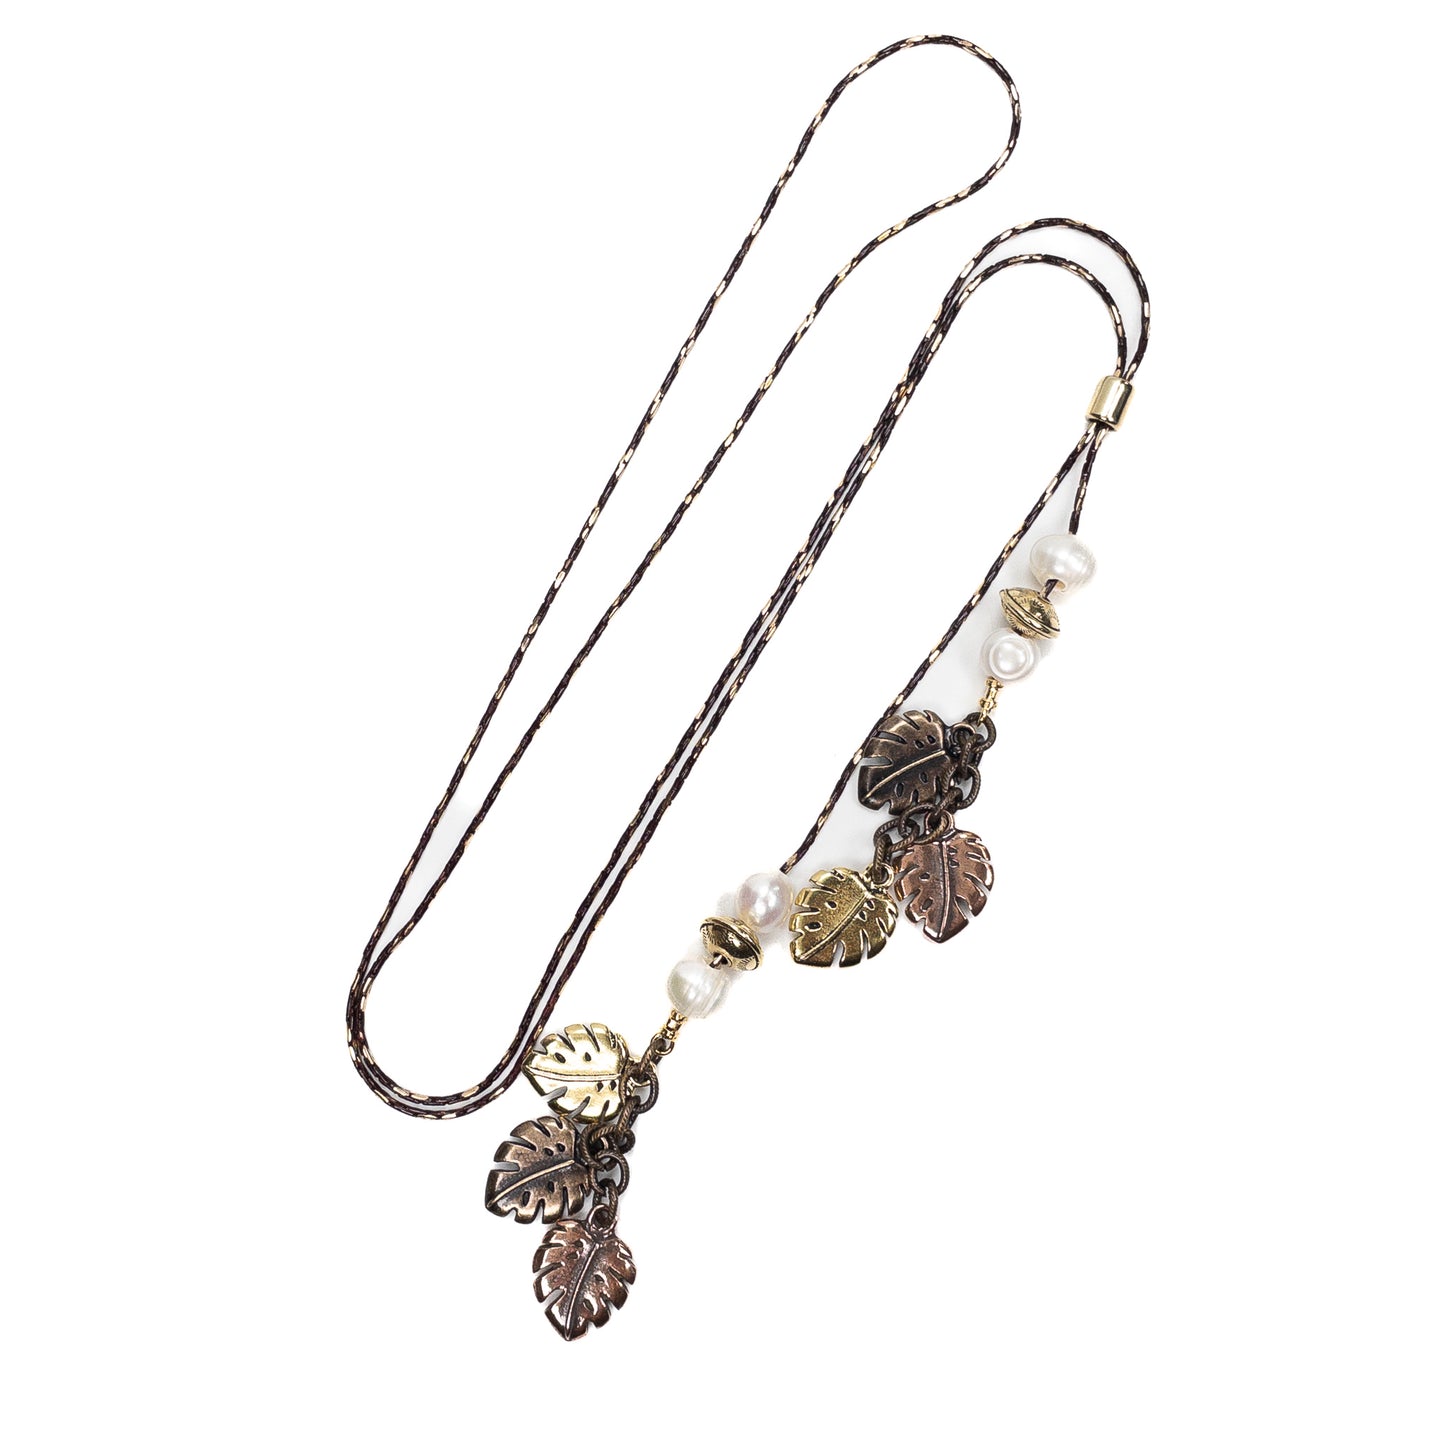 Fall Monstera Leaves Lariat Necklace - Kit or Finished Necklace